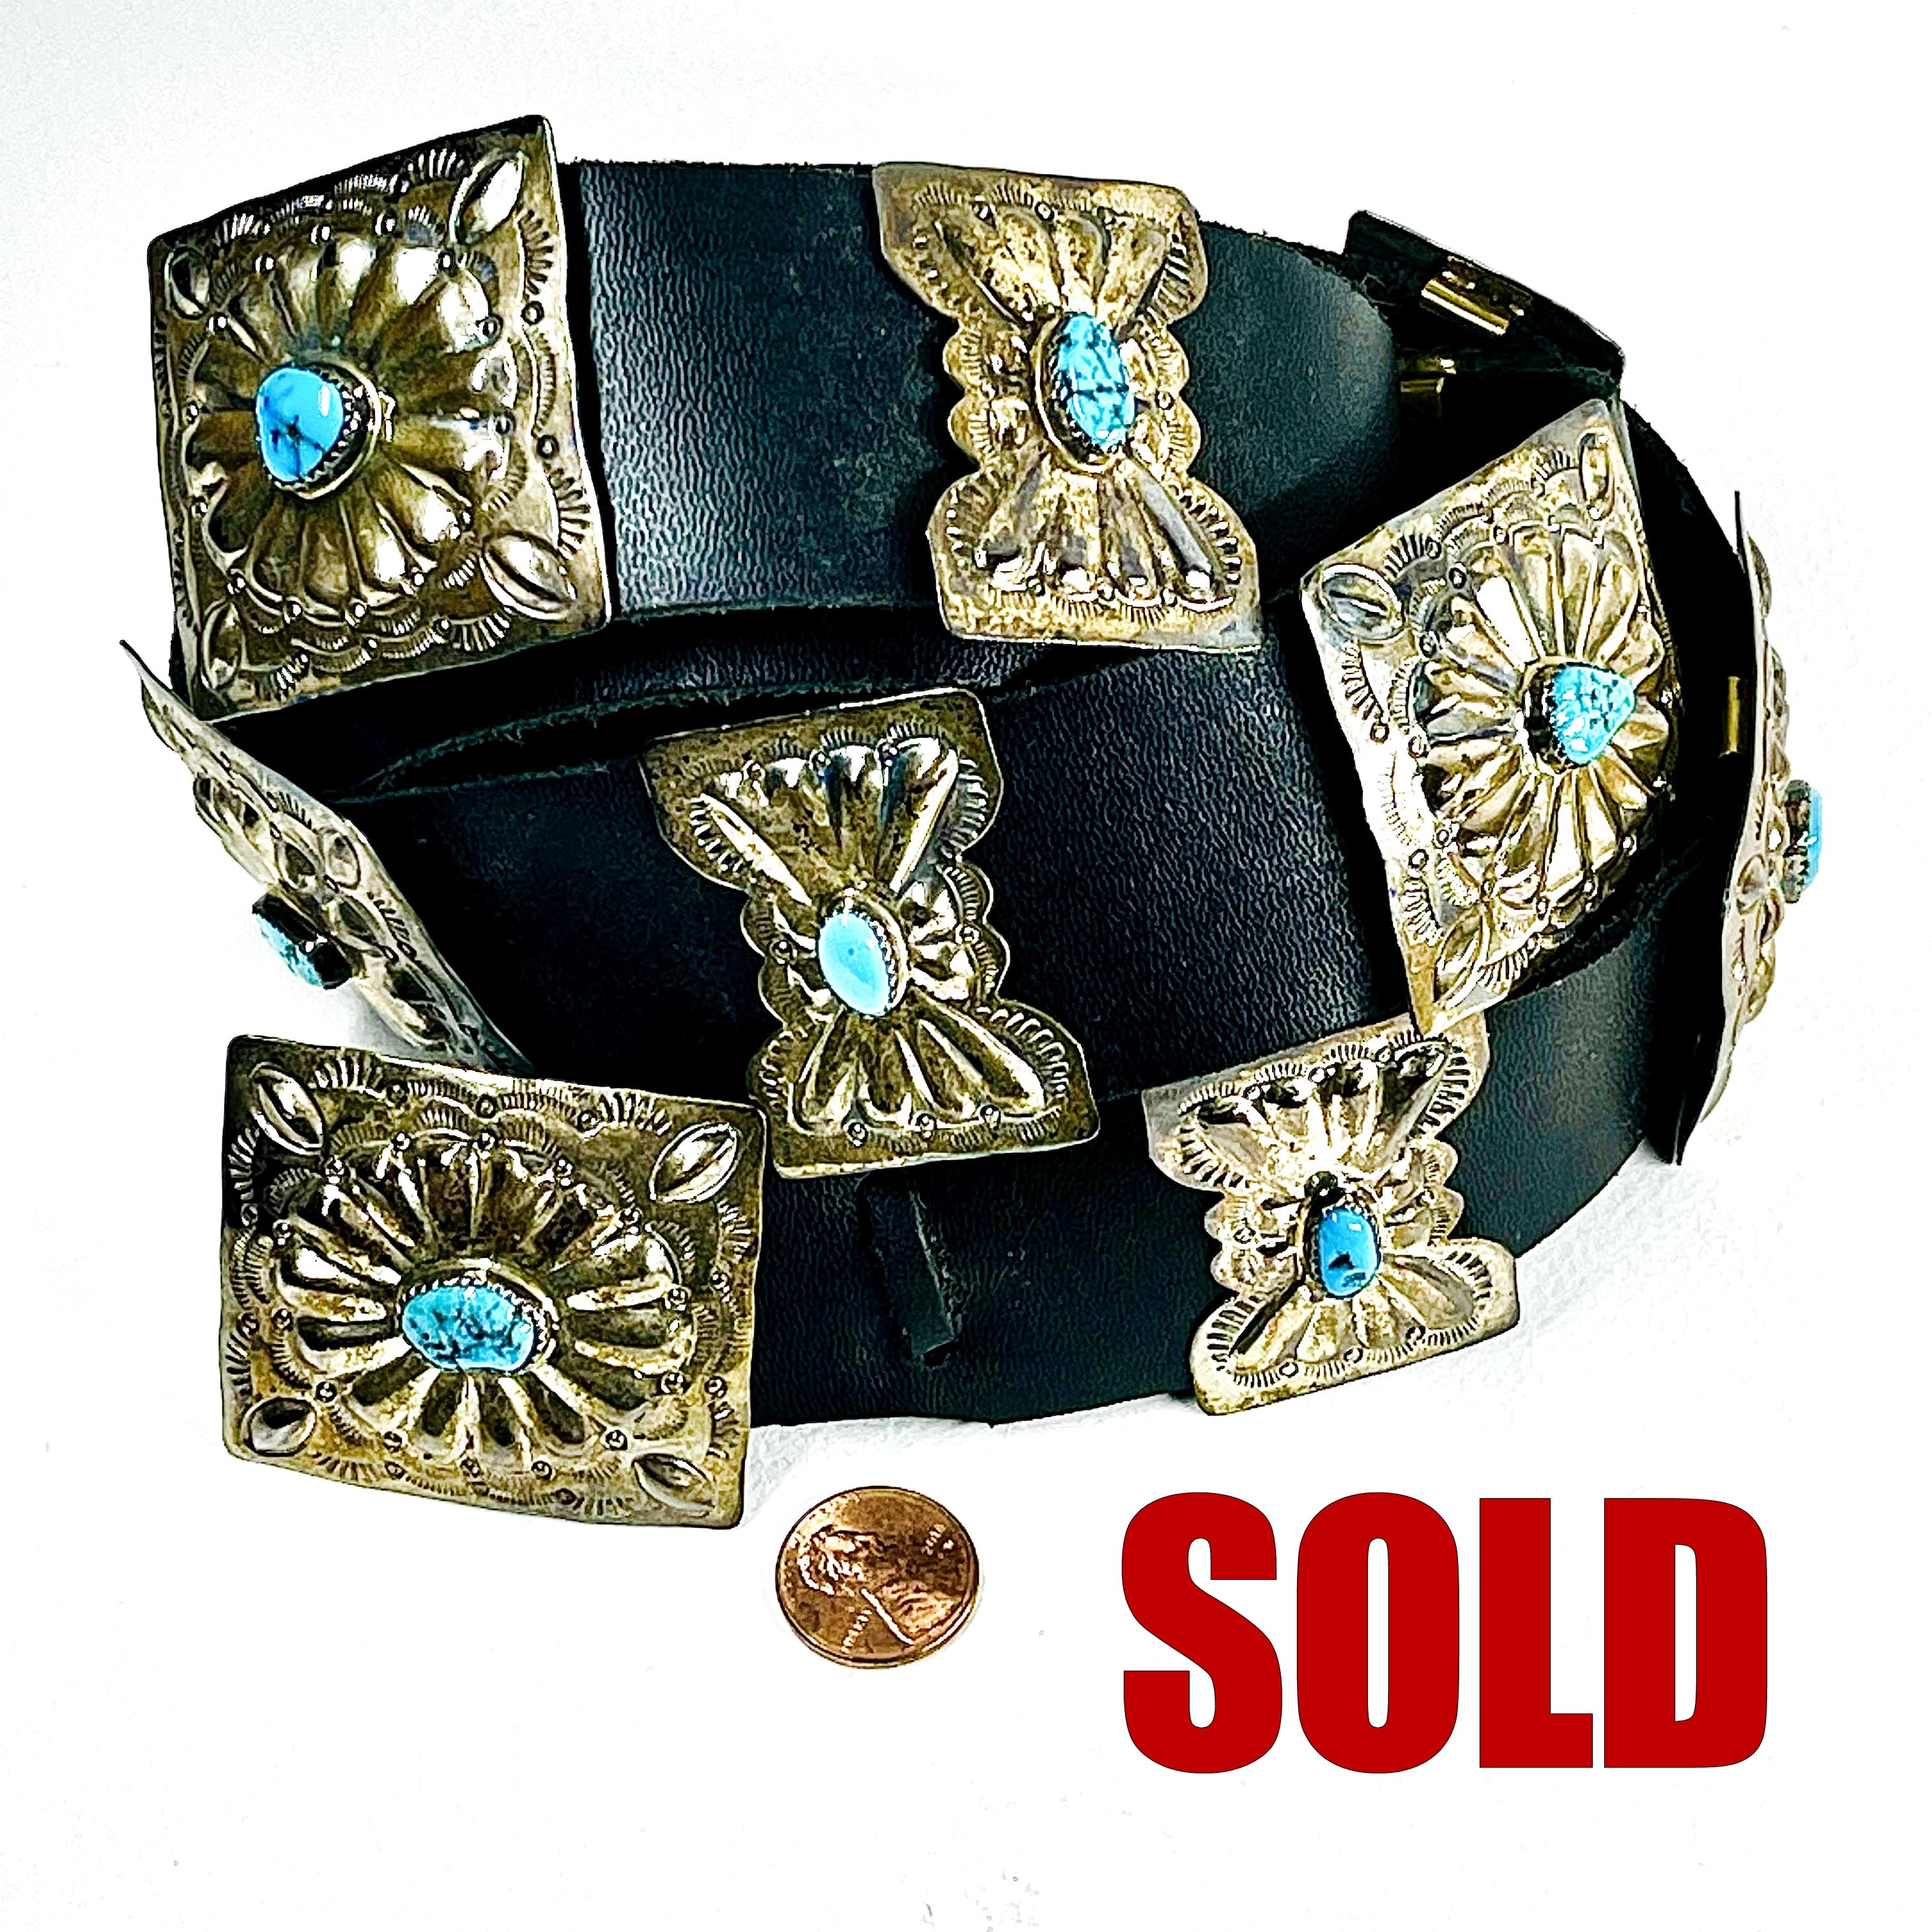 Turquoise Inlaid Concho Belt | $495. +   shipping, depending on your location | Texas sales tax applies to Texas Residents! | 
CLICK  IMAGE for more views & information. | Native American made products  
from Zunispirits.com!